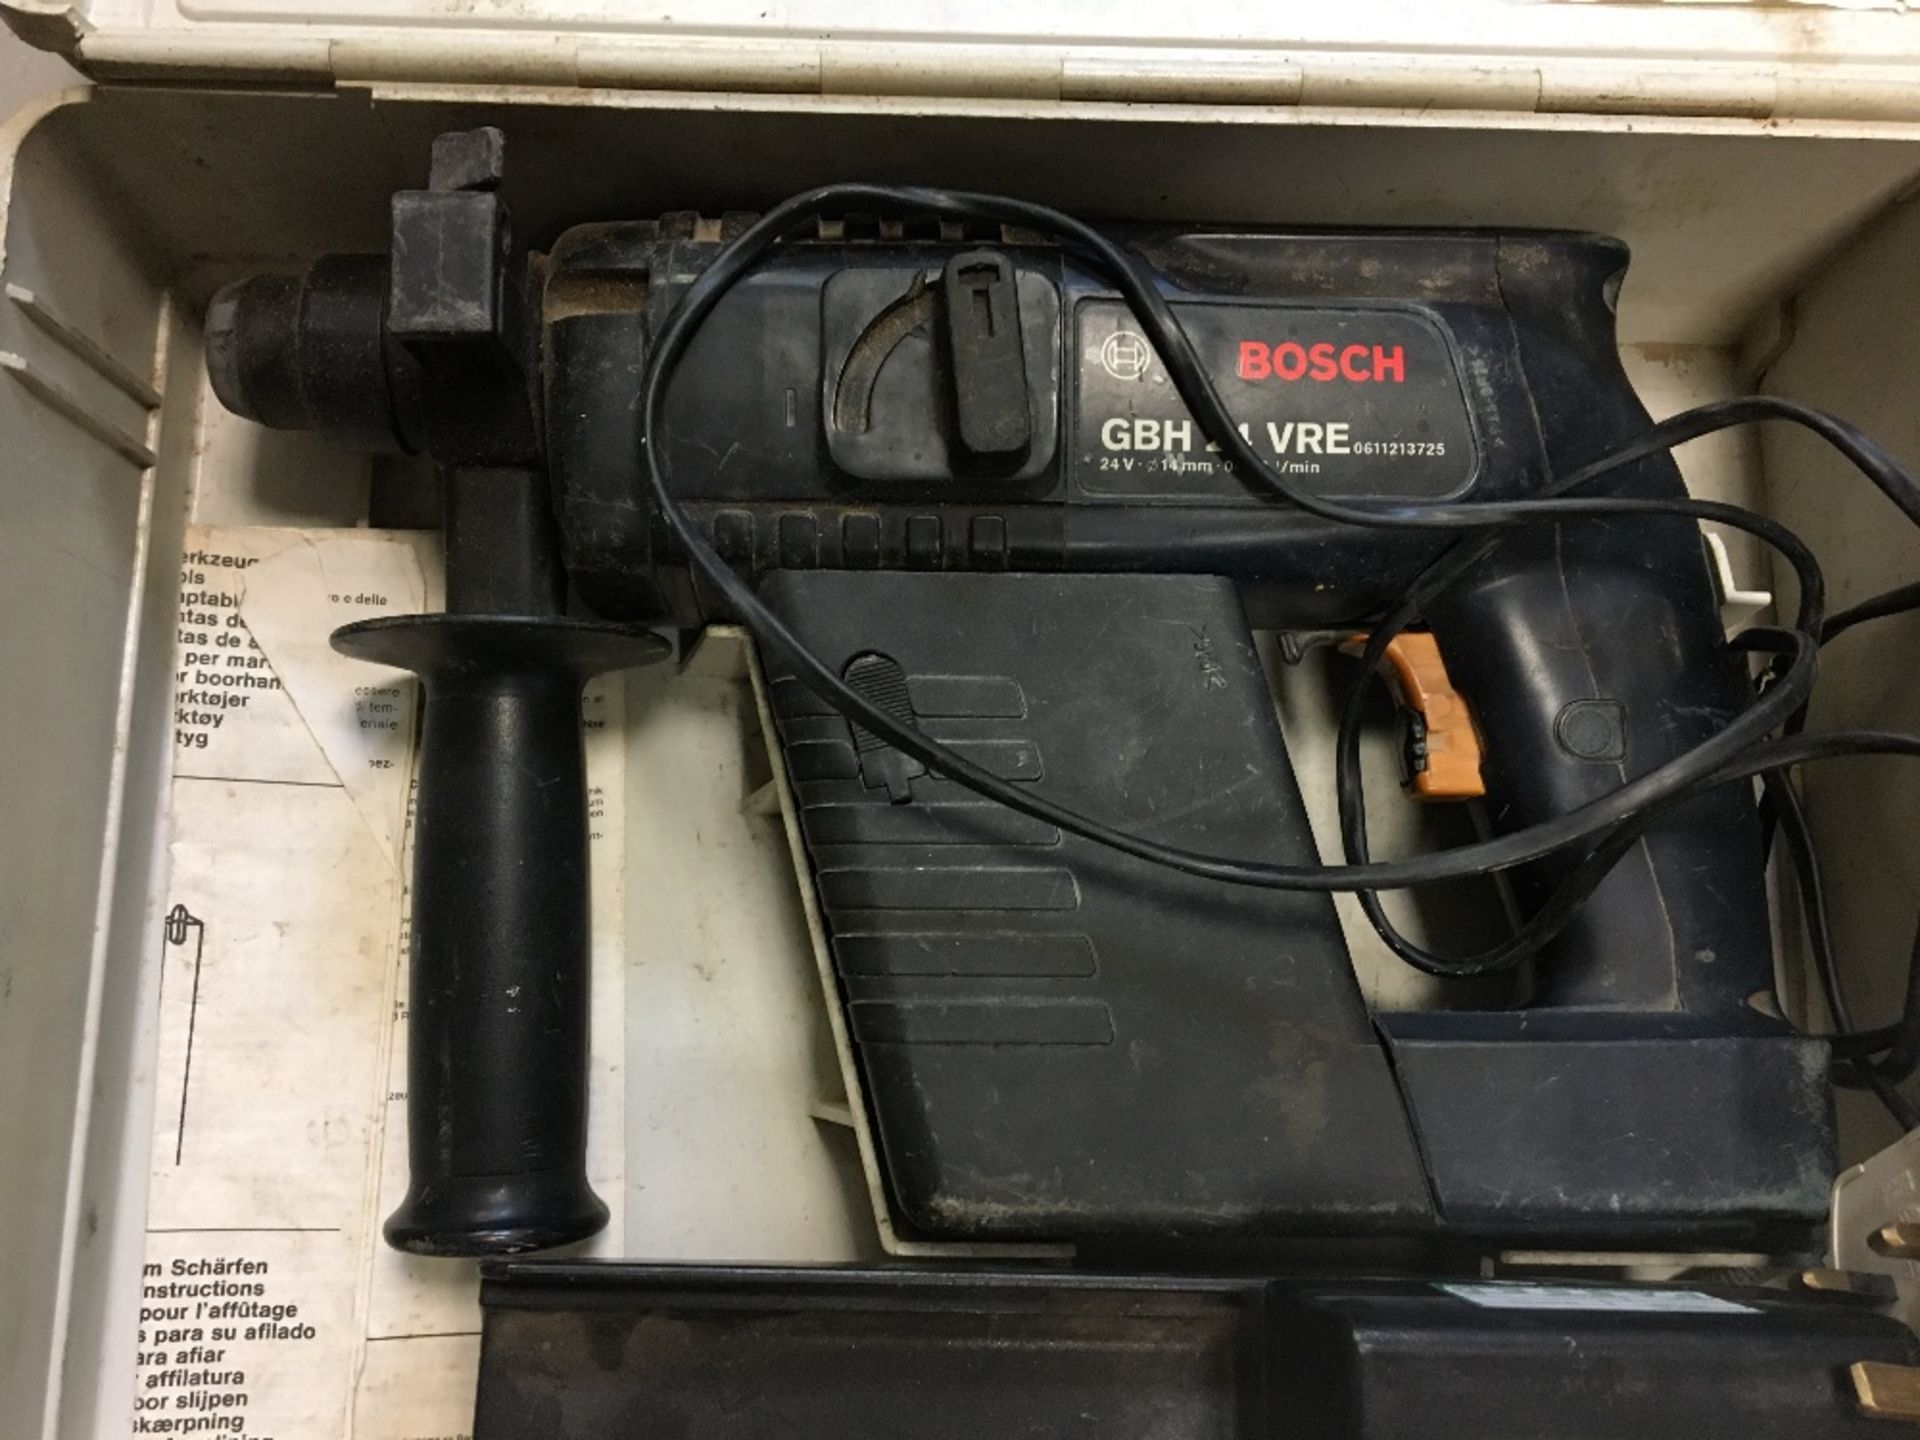 Bosch GBH 24 VRE Impact Driver with Battery Charger - Image 3 of 5